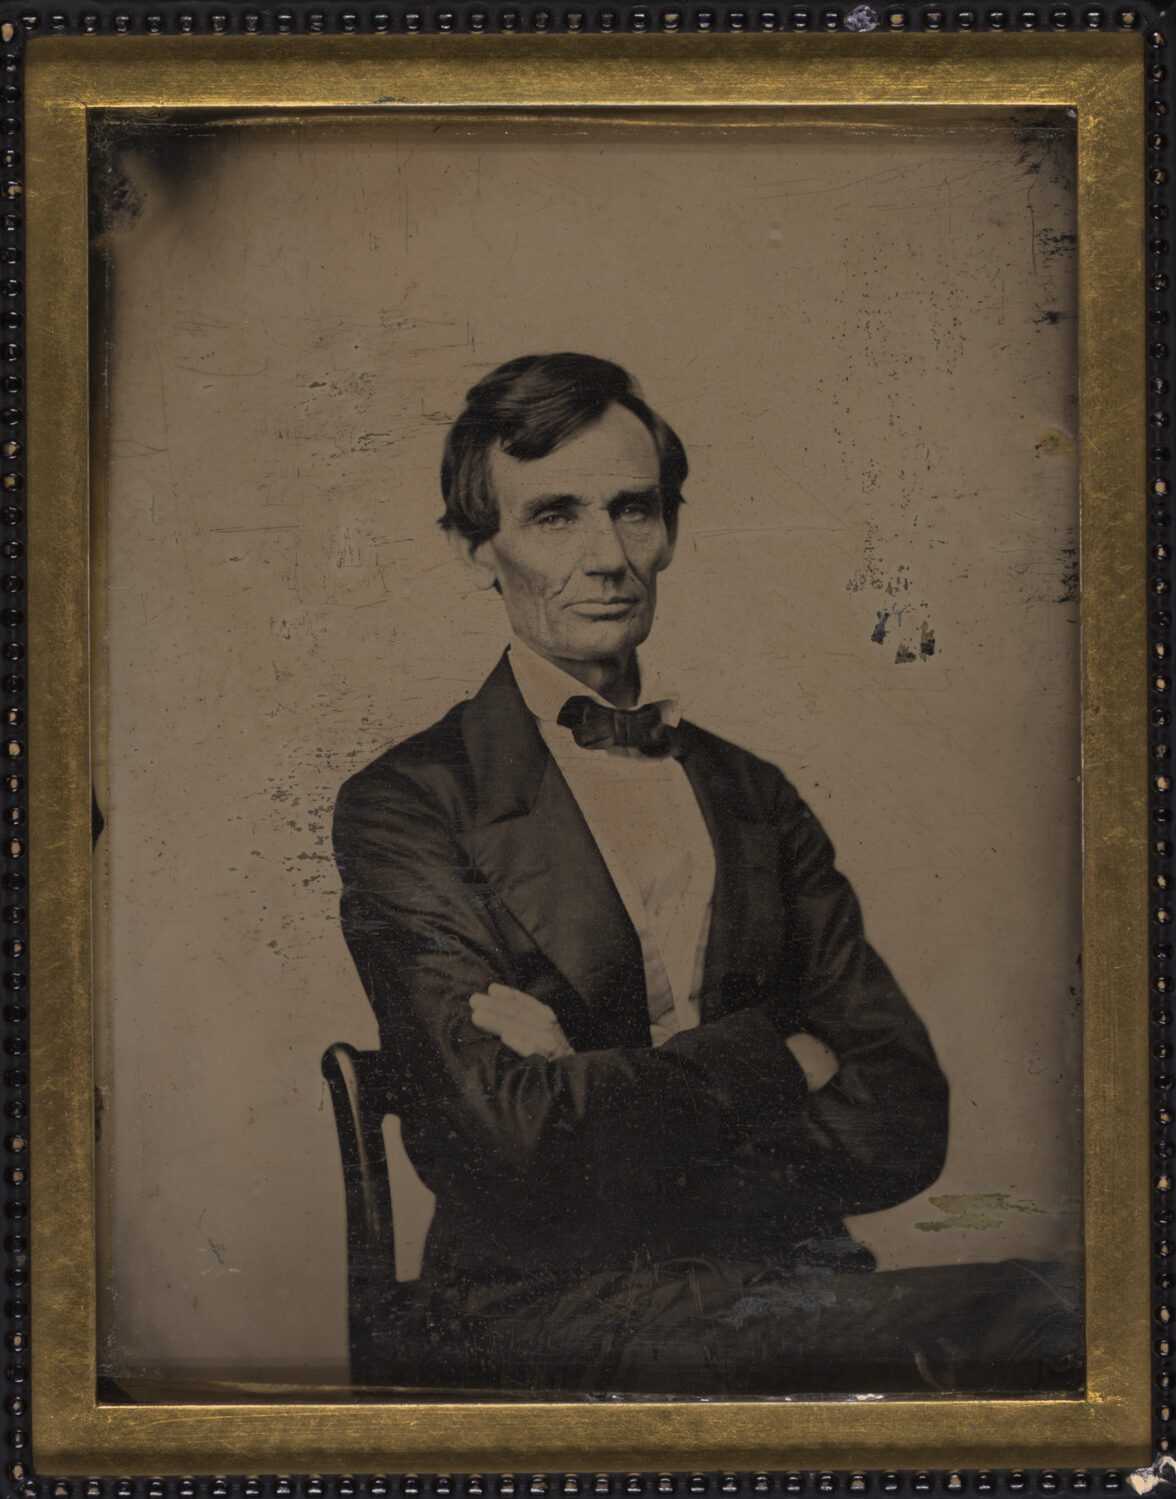 Photograph of Abraham Lincoln in gold frame